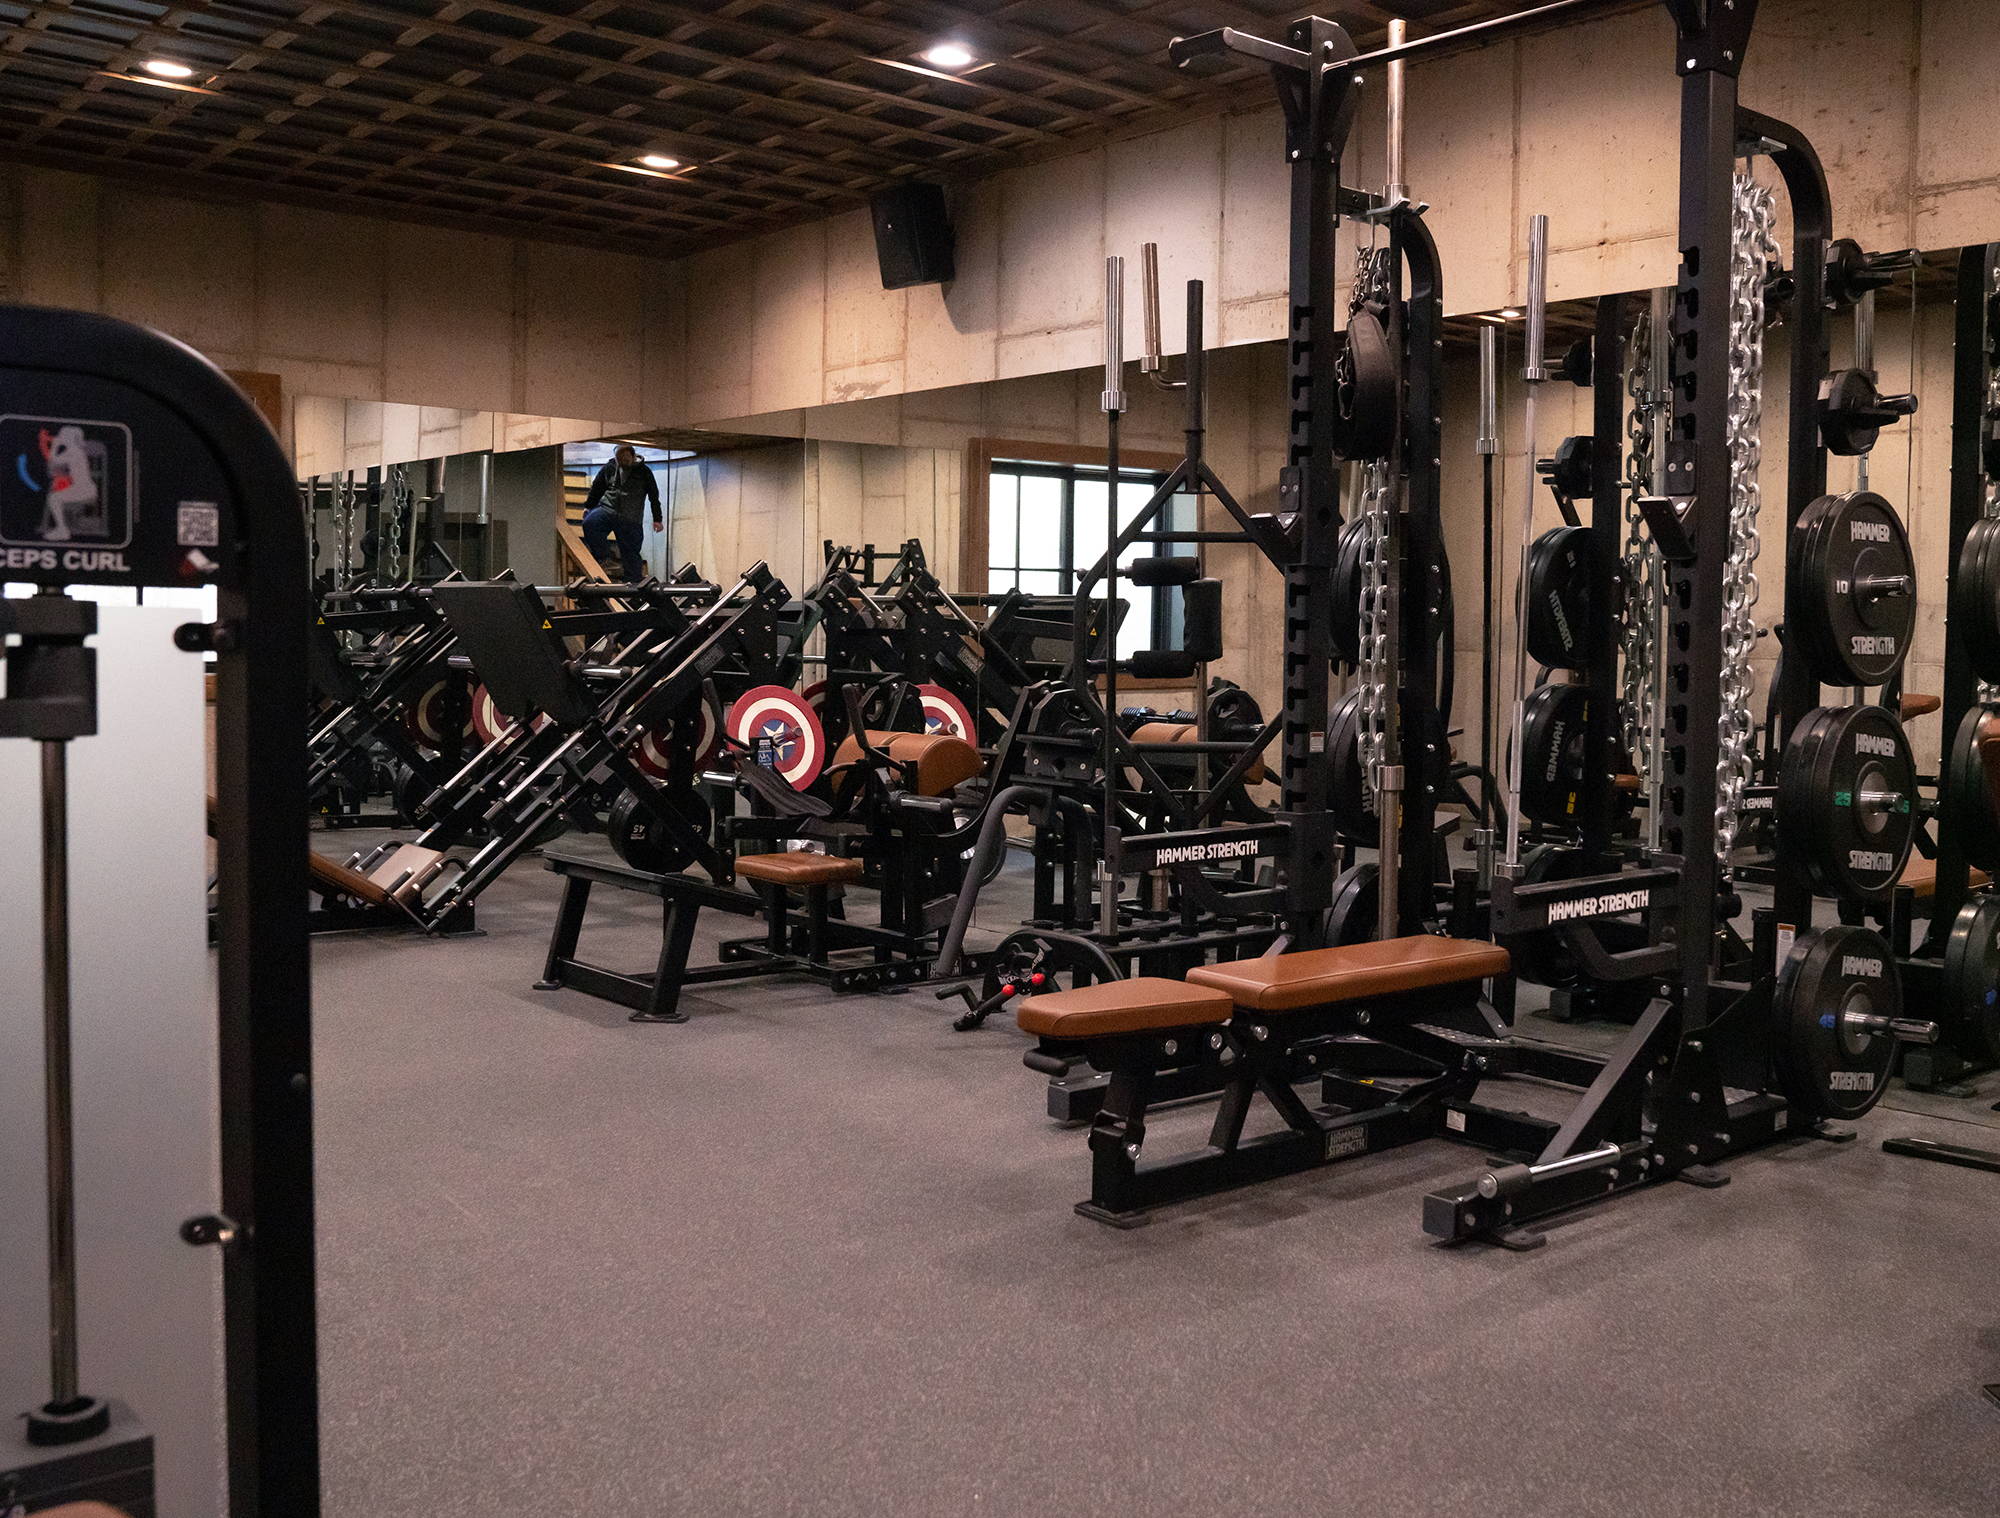 Home gym designs to help you create the best training & wellness space